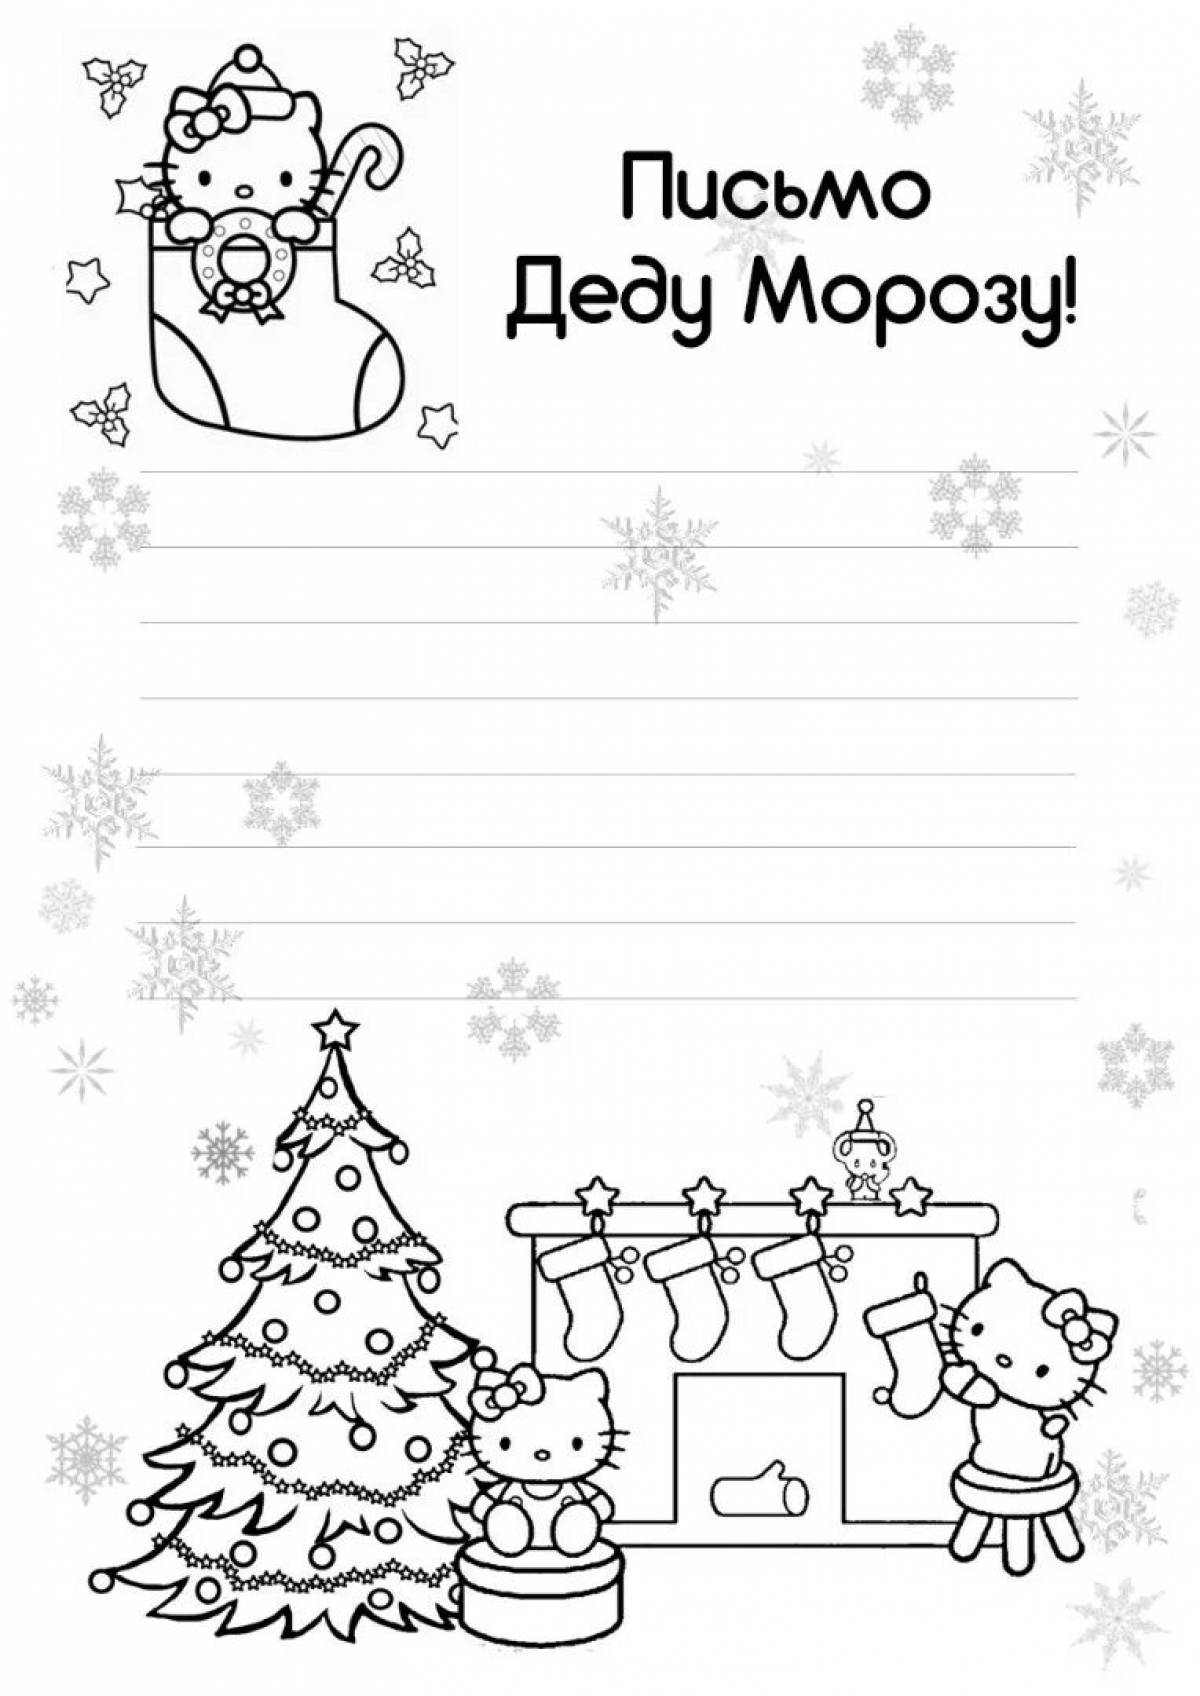 Letter to Santa Claus template #1